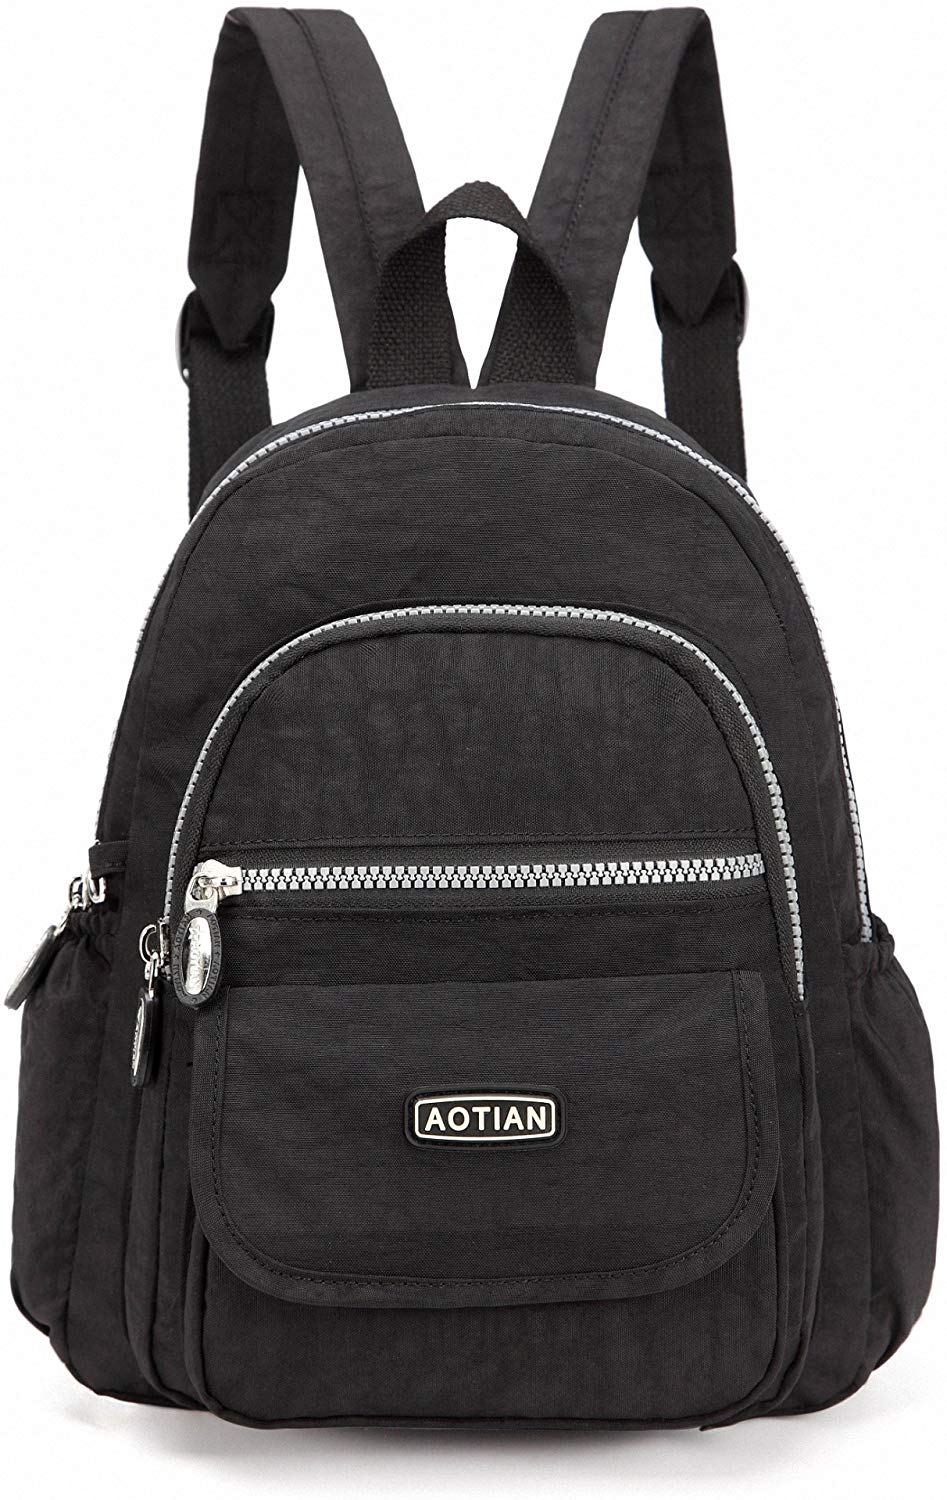 Top 4 Best Aotian Backpacks Review Brand Review 